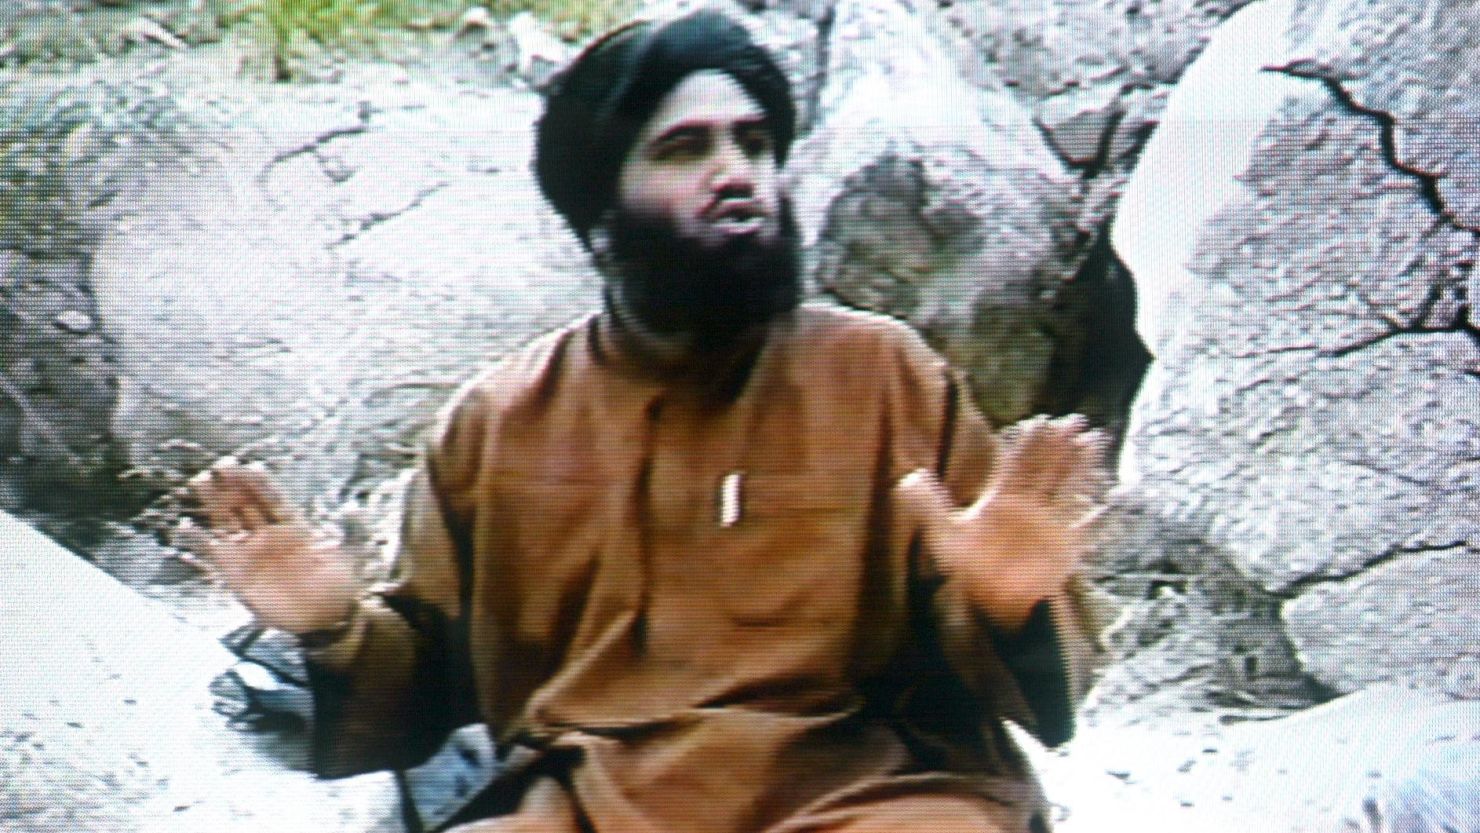 Osama bin Laden's son-in-law Suleiman Abu Ghaith, shown here in a frame grab from the Saudi-owned television network MBC, was found guilty Wednesday in New York of helping al Qaeda terrorists conspire to kill Americans and providing material support to terrorists.